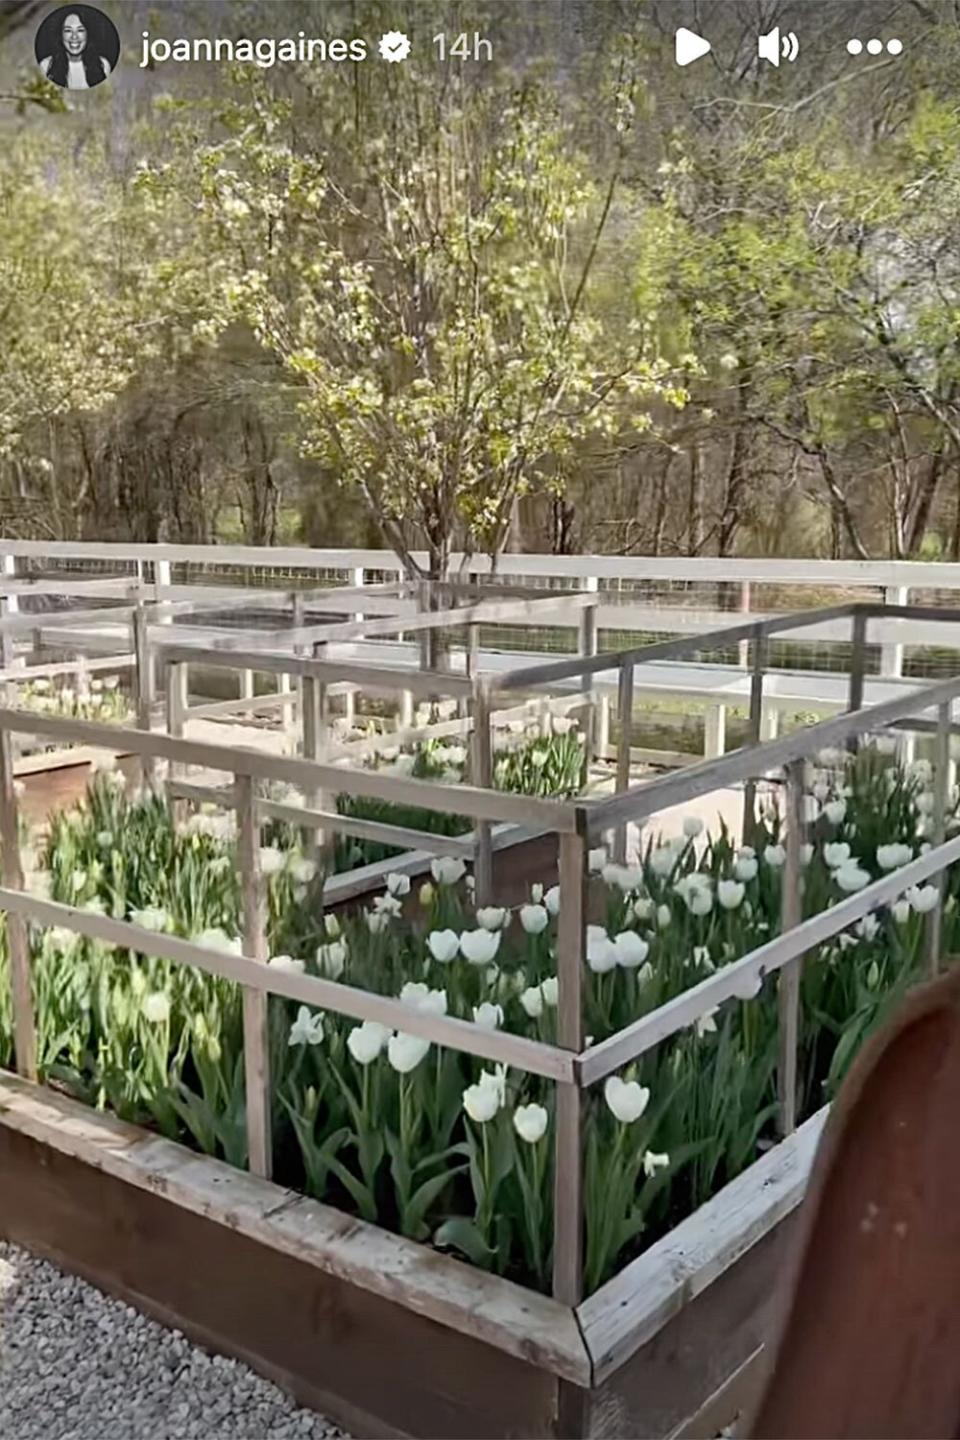 Joanna Gaines Gives a Tour of Her Lush Garden: ‘Everything Had Bloomed’